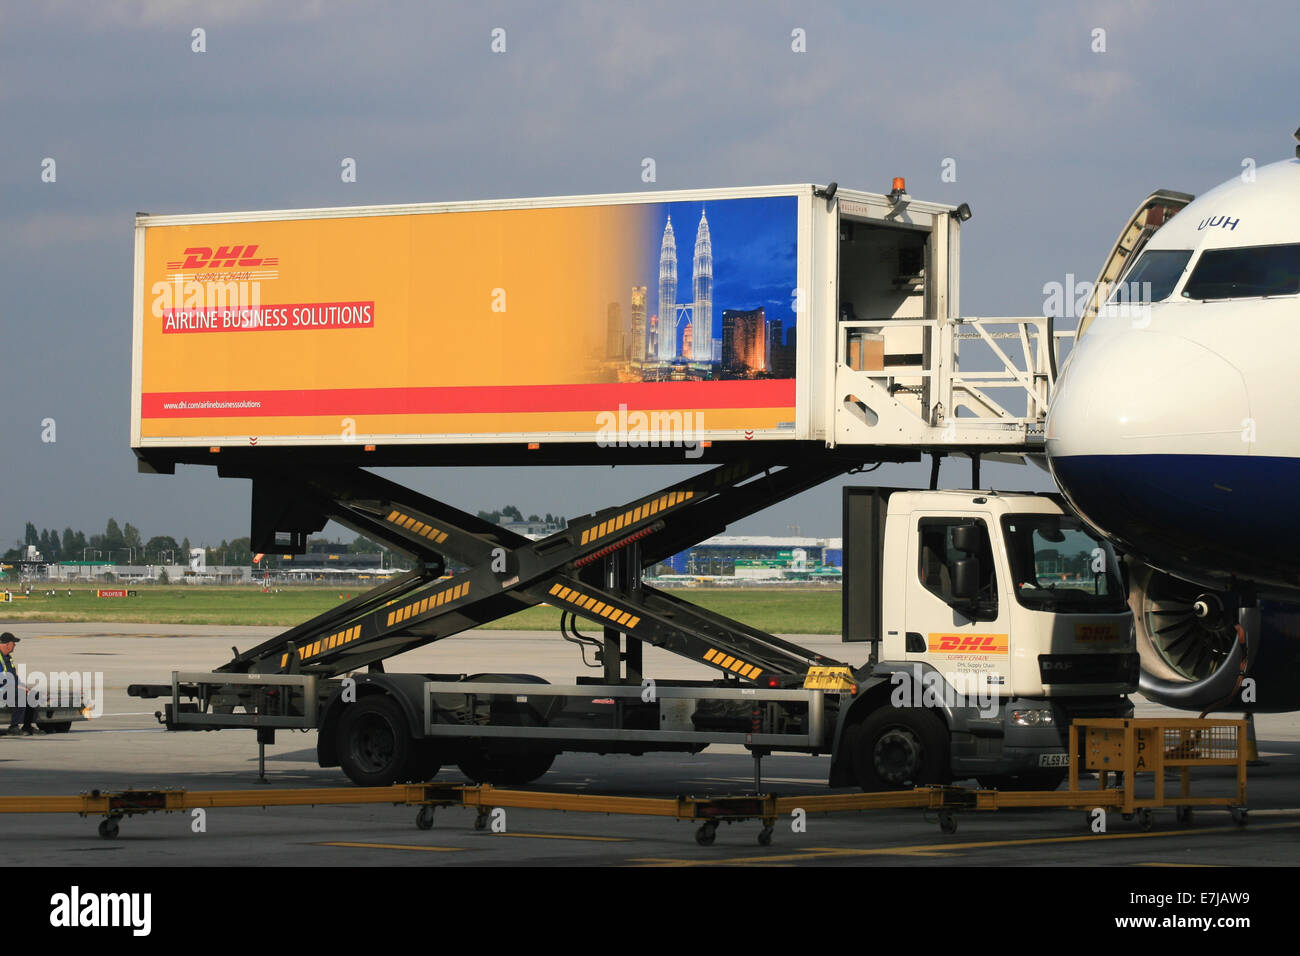 DHL AIRLINE BUSINESS SOLUTIONS CATERING TRUCK Stock Photo